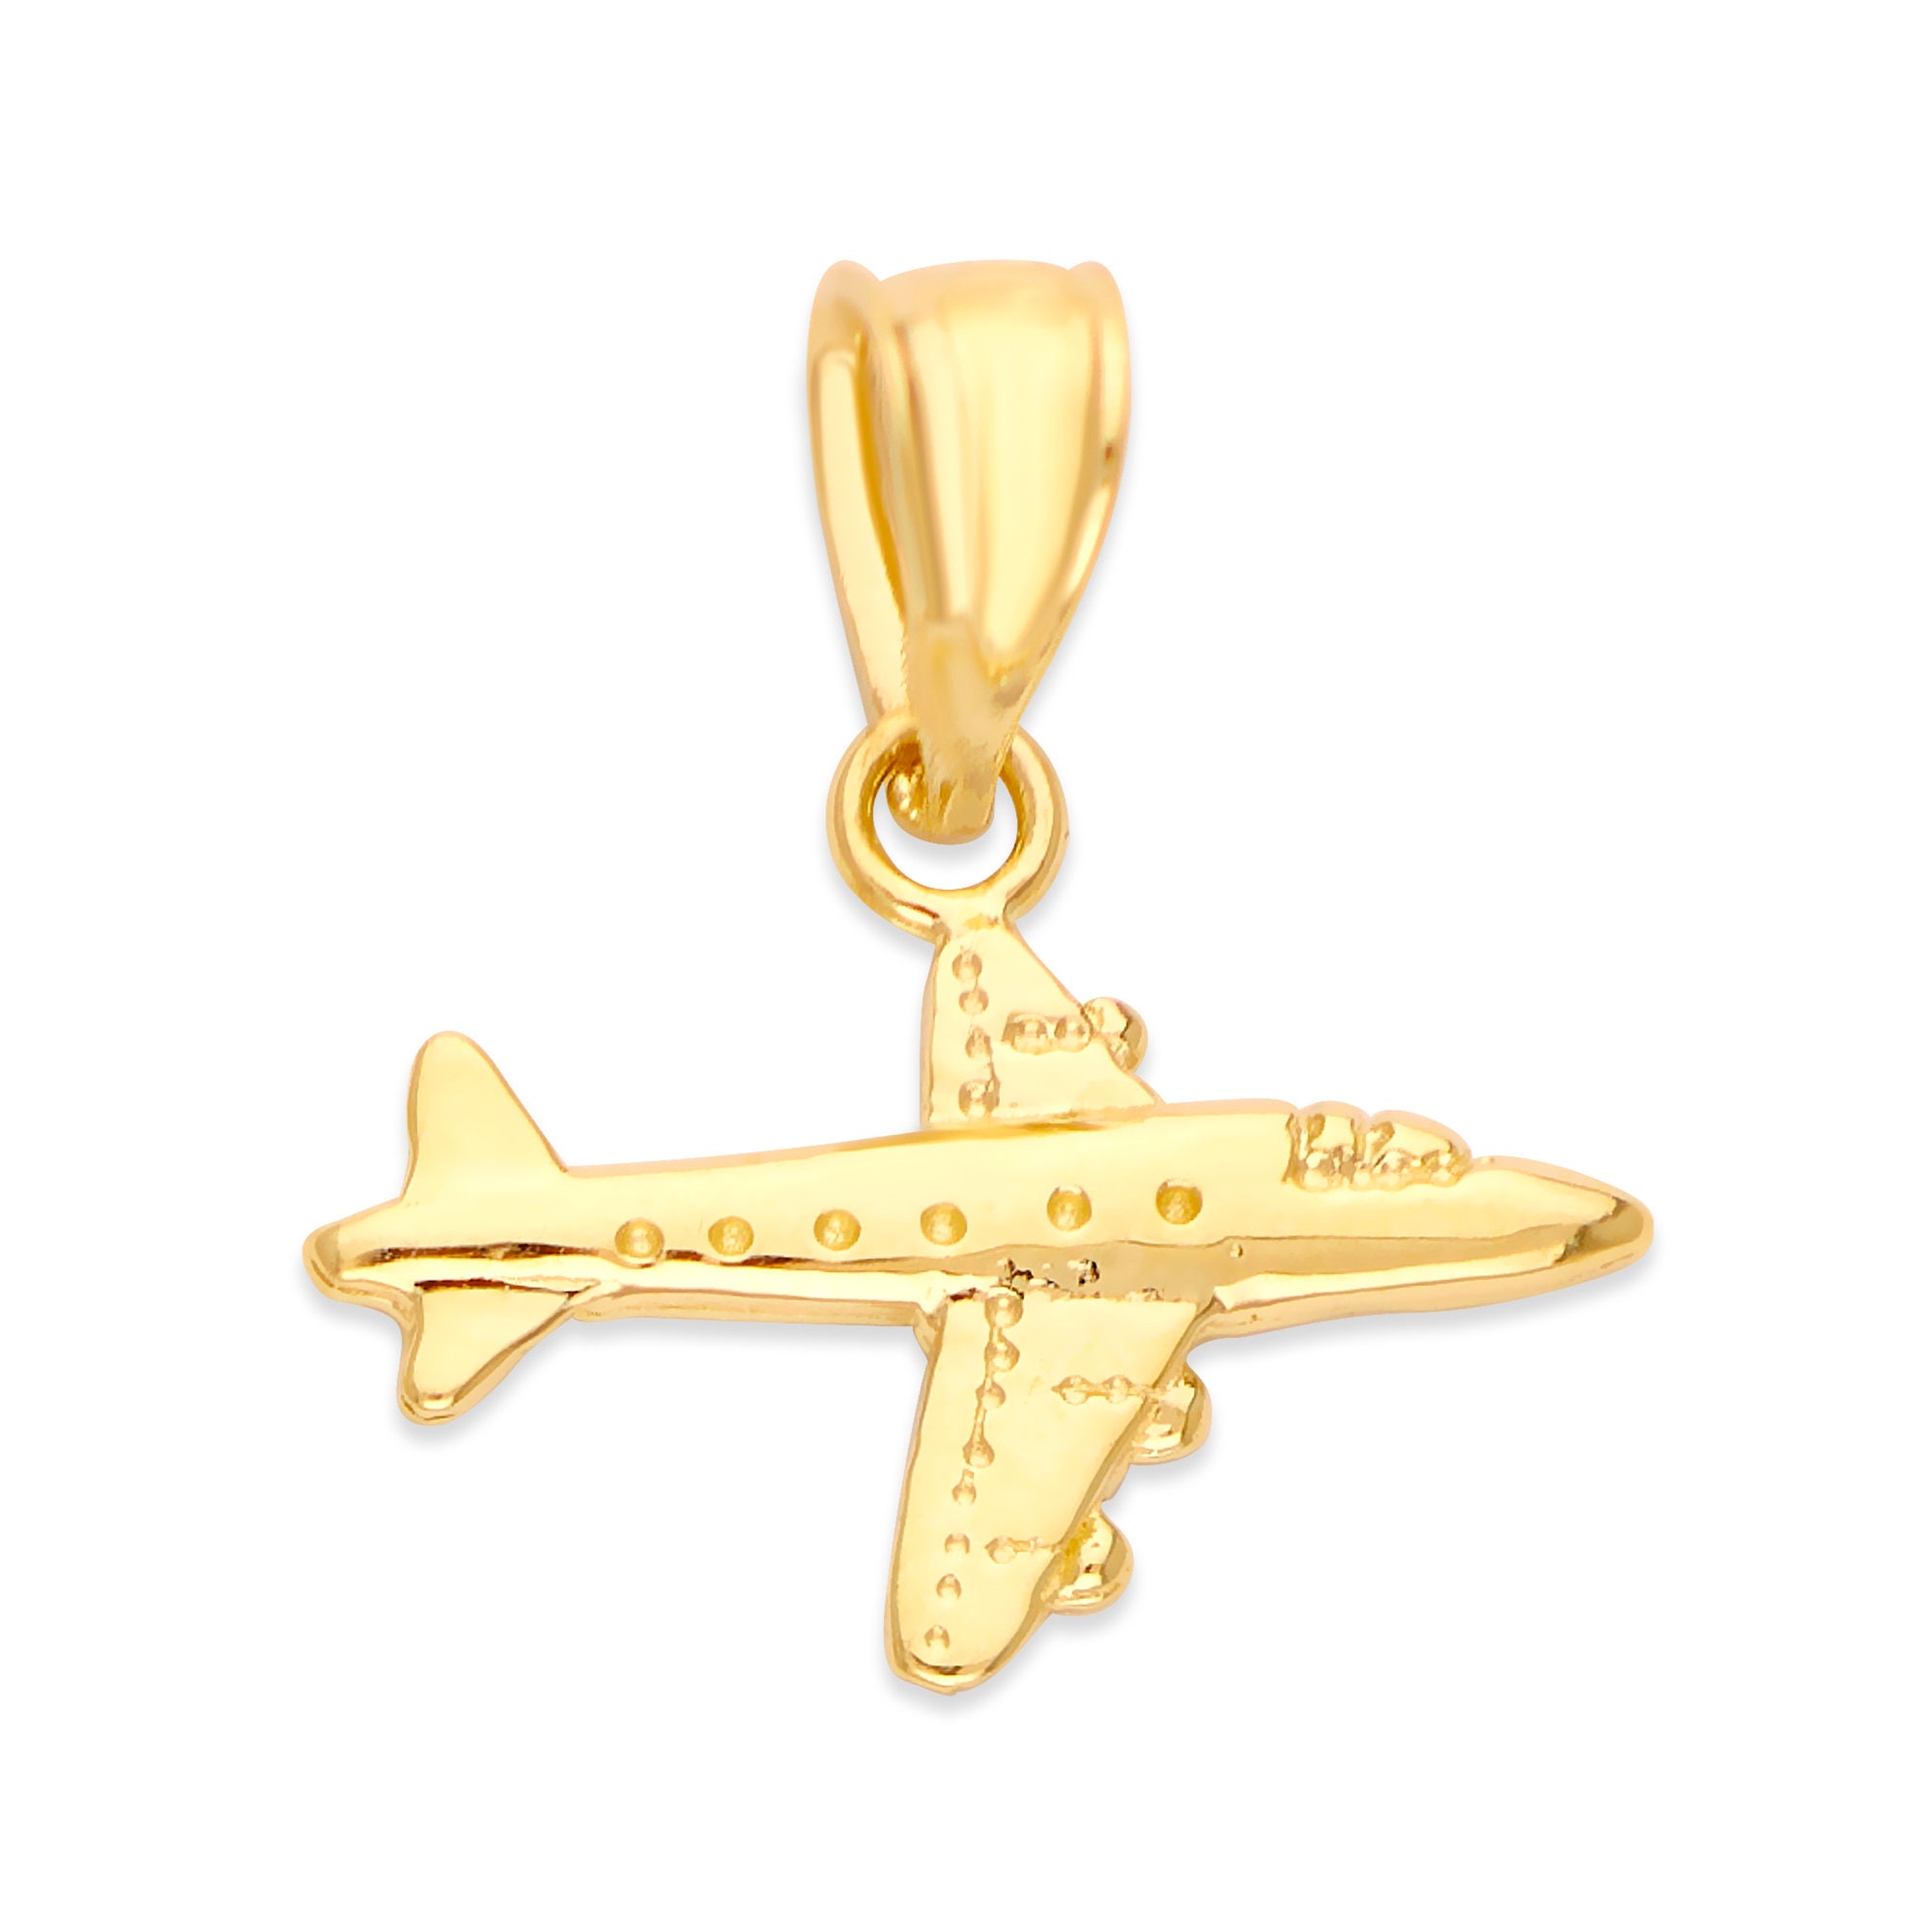 Plane Charm, Gold Filled, Sterling Silver, Permanent Jewelry Charms, Bulk  Gold Charms, Bulk Charms Silver, Wholesale Gold Charms, CH05 